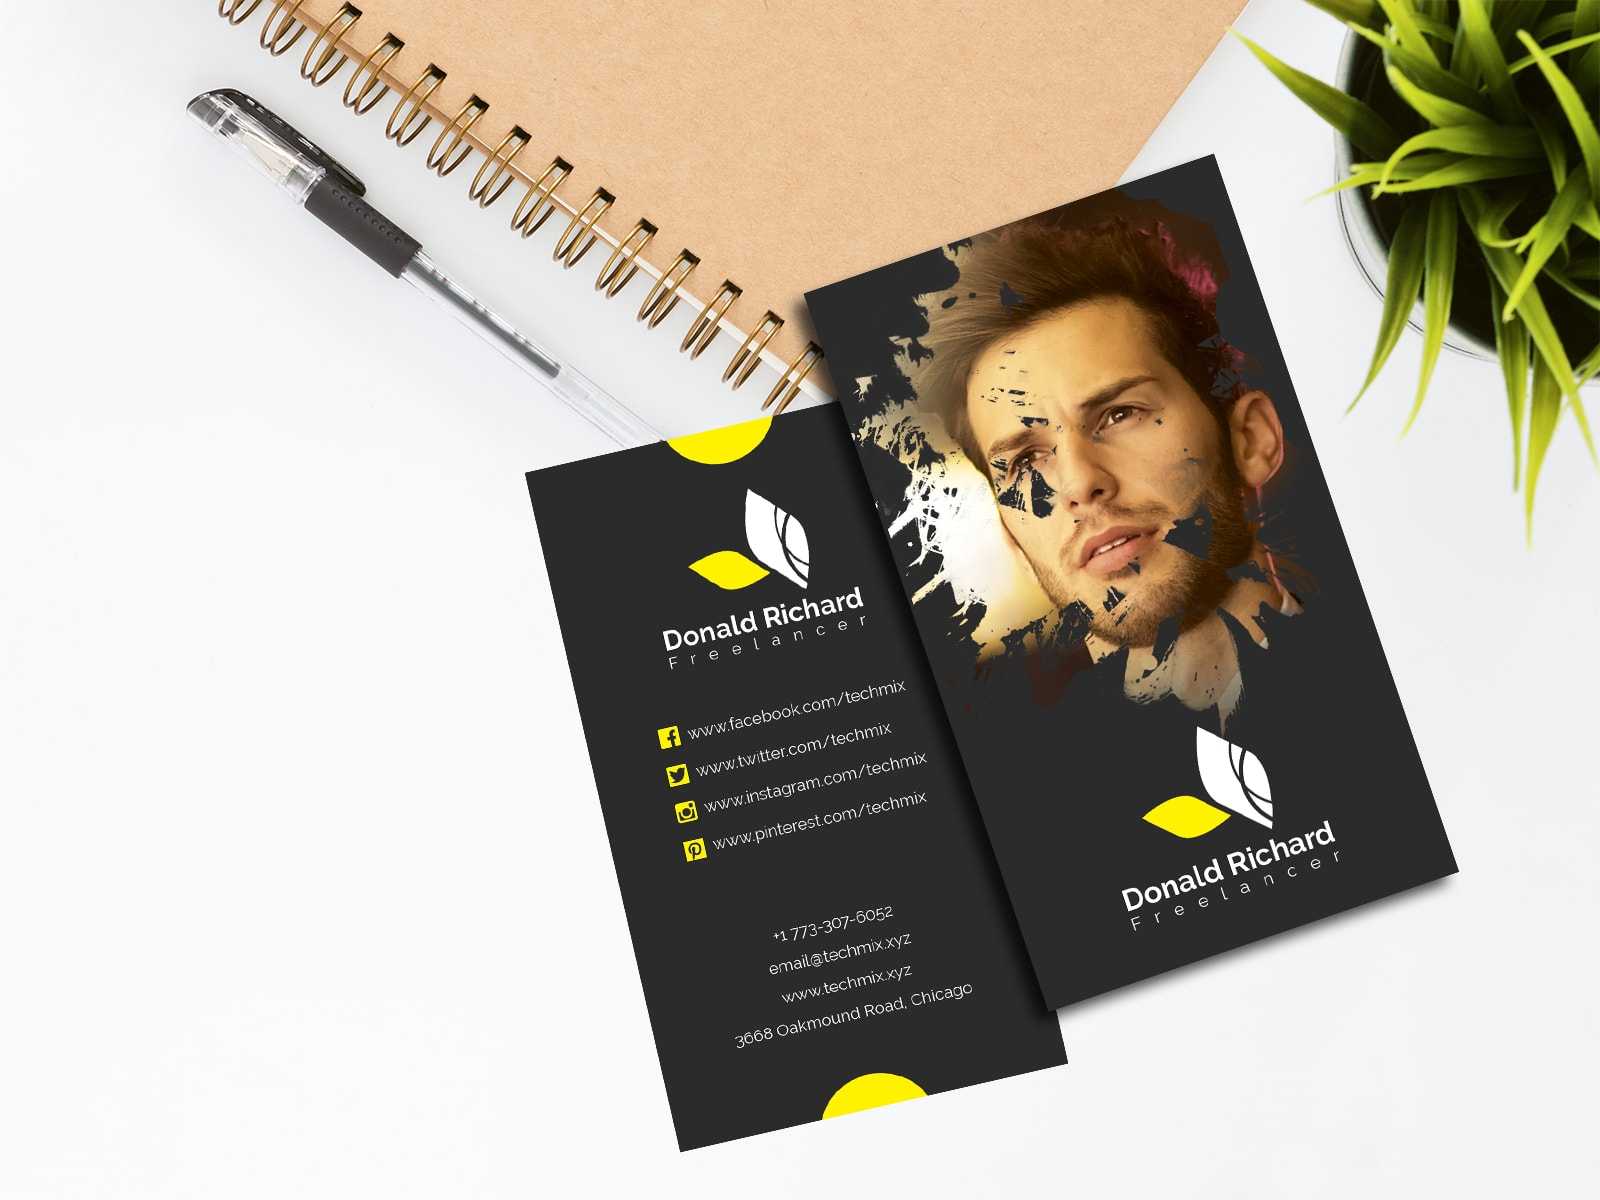 5 Best Freelancer Business Cards 2020 | Techmix Pertaining To Freelance Business Card Template